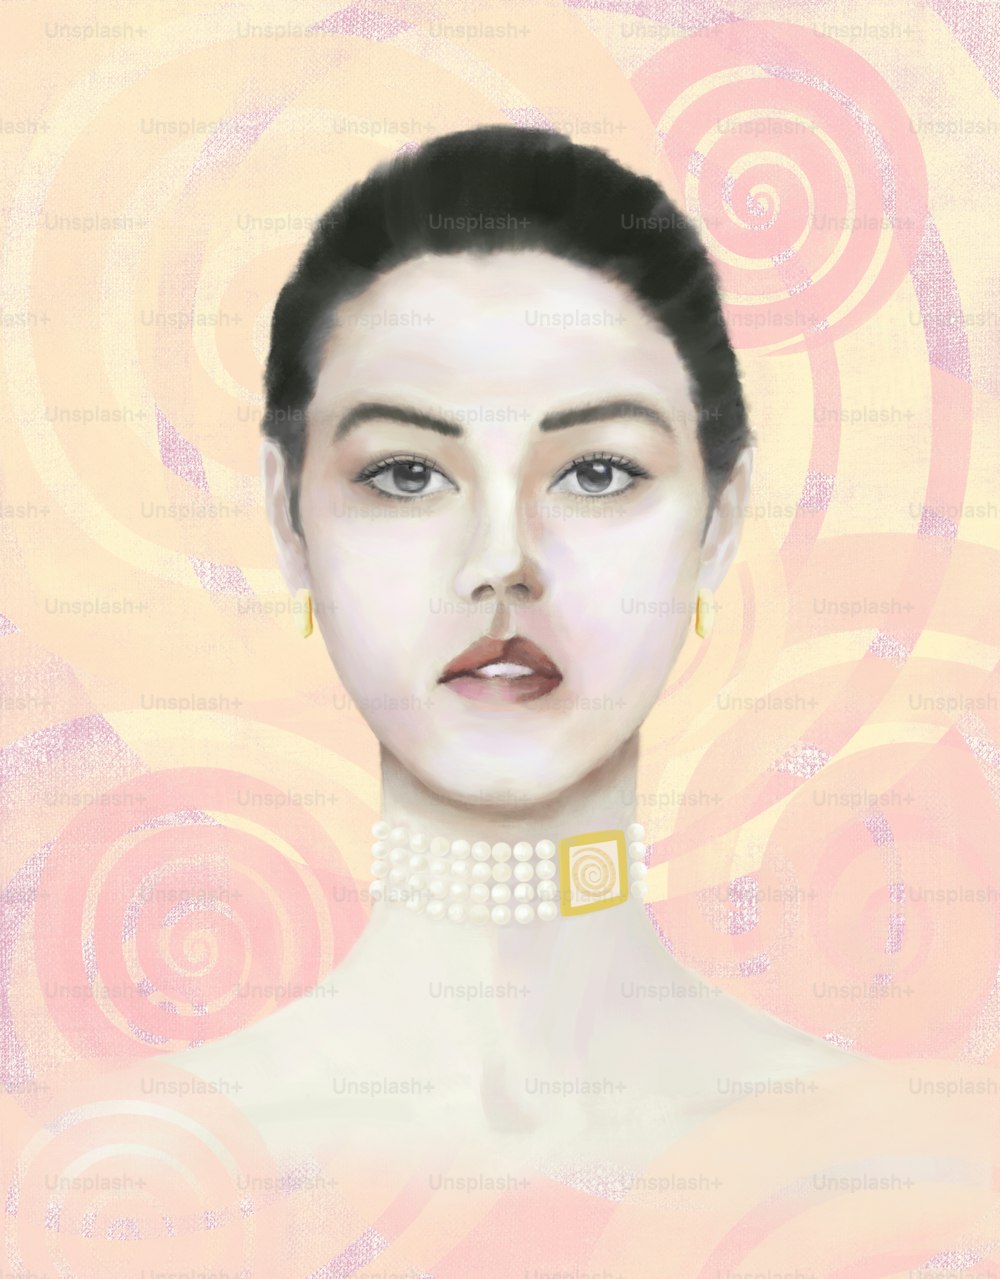 Portrait of a young woman with Asian and European roots with decorations including the symbol of the sun on a geometric background